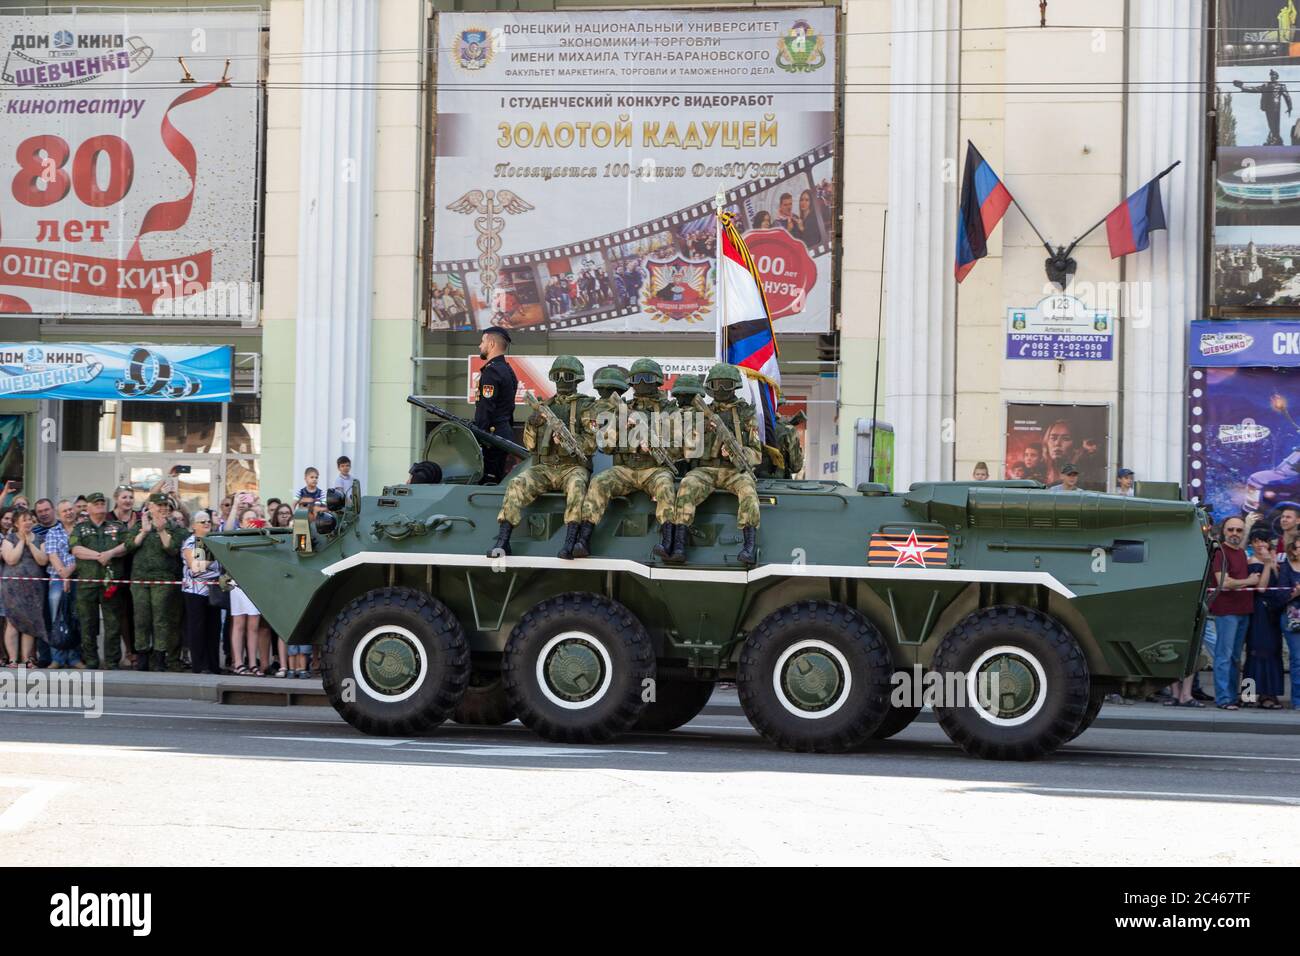 Donetsk, Donetsk People Republic, Ukraine - June 24, 2020: A column of armored personnel carriers with armed soldiers in full outfit on armor move alo Stock Photo